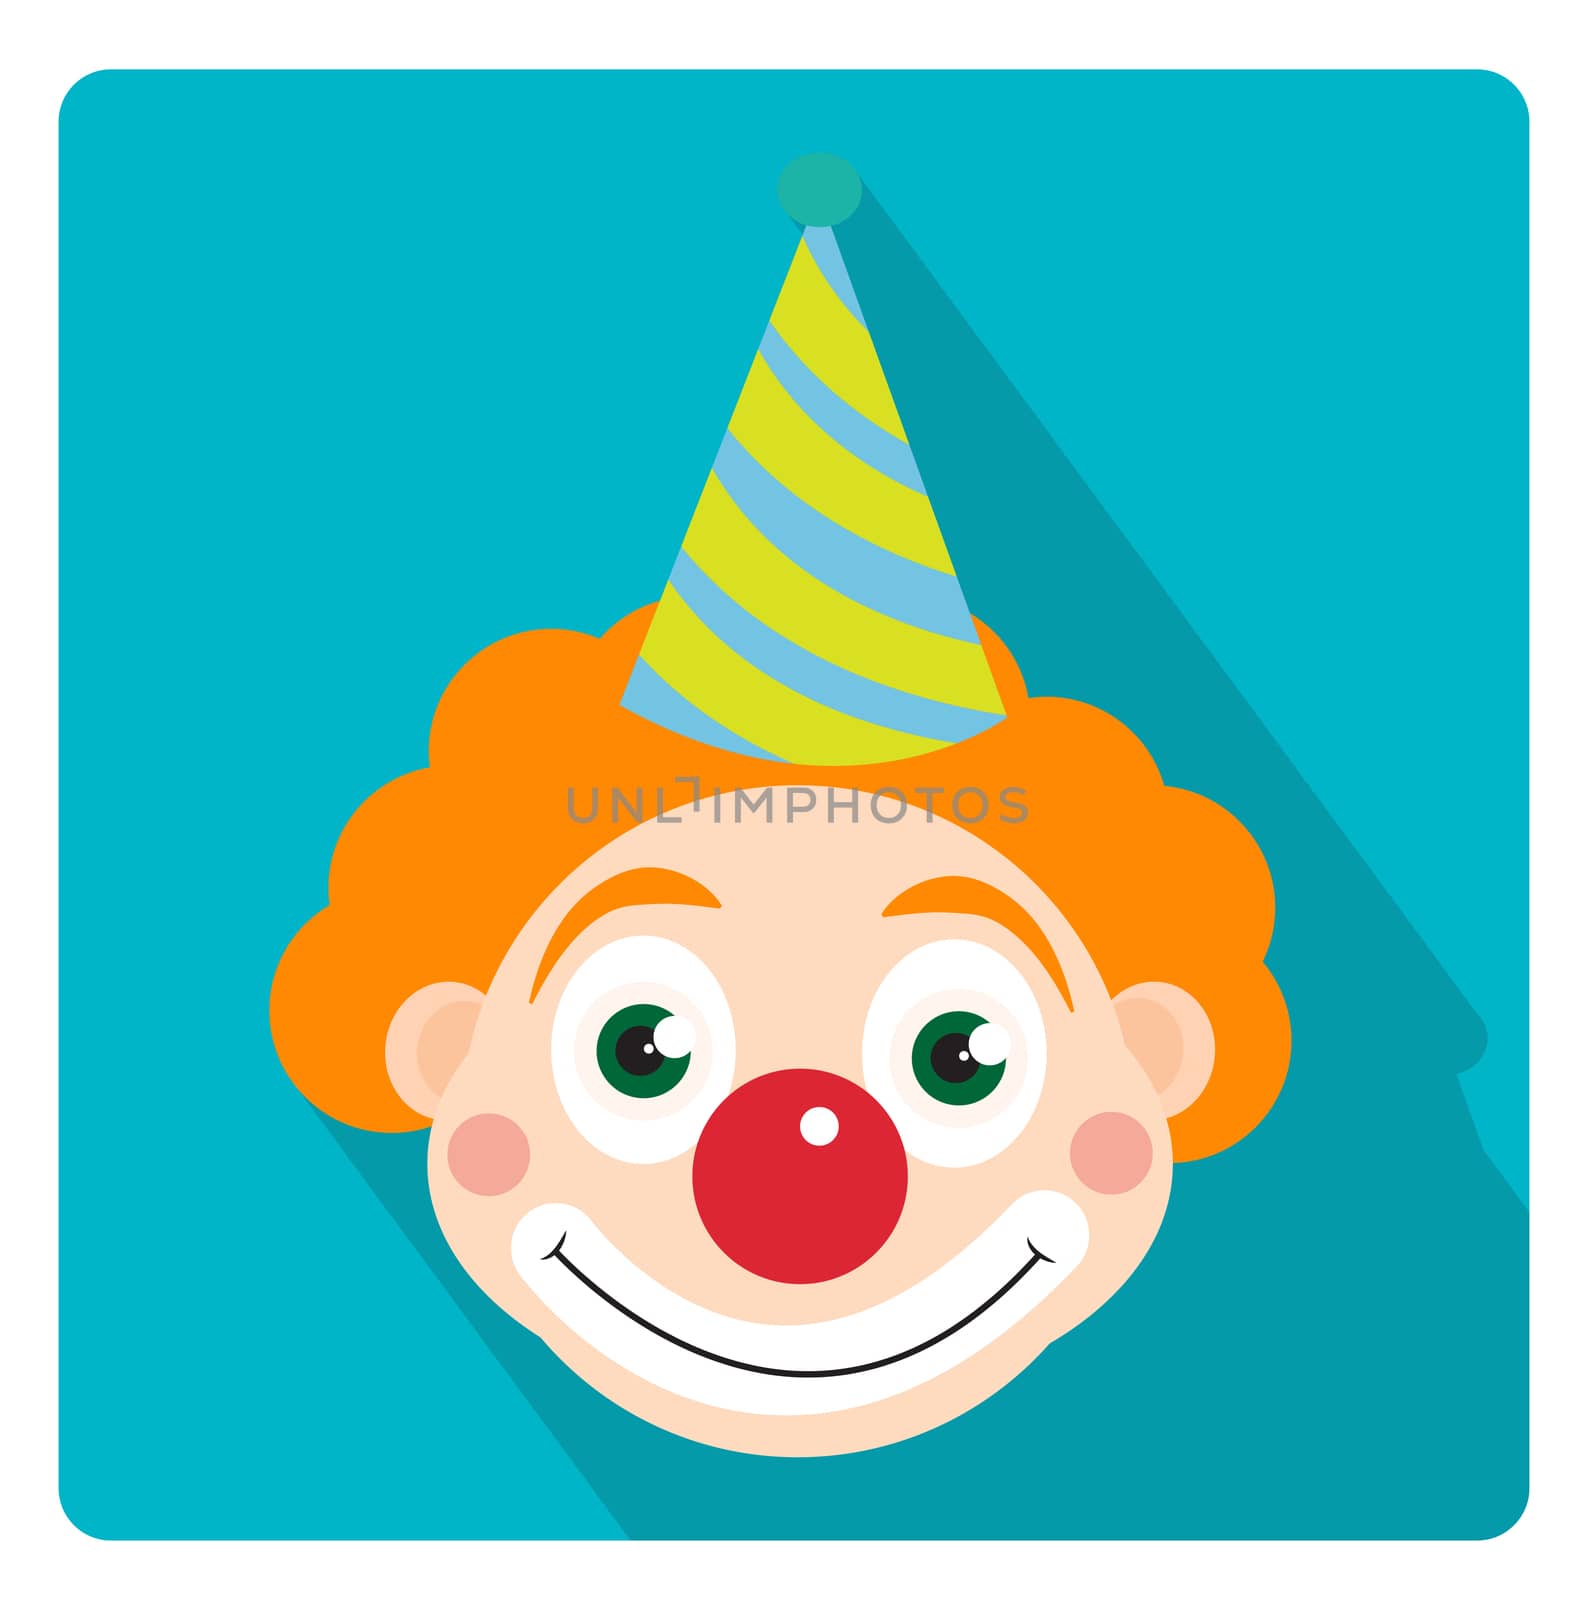 Clown icon flat style with long shadows, isolated on white background. illustration